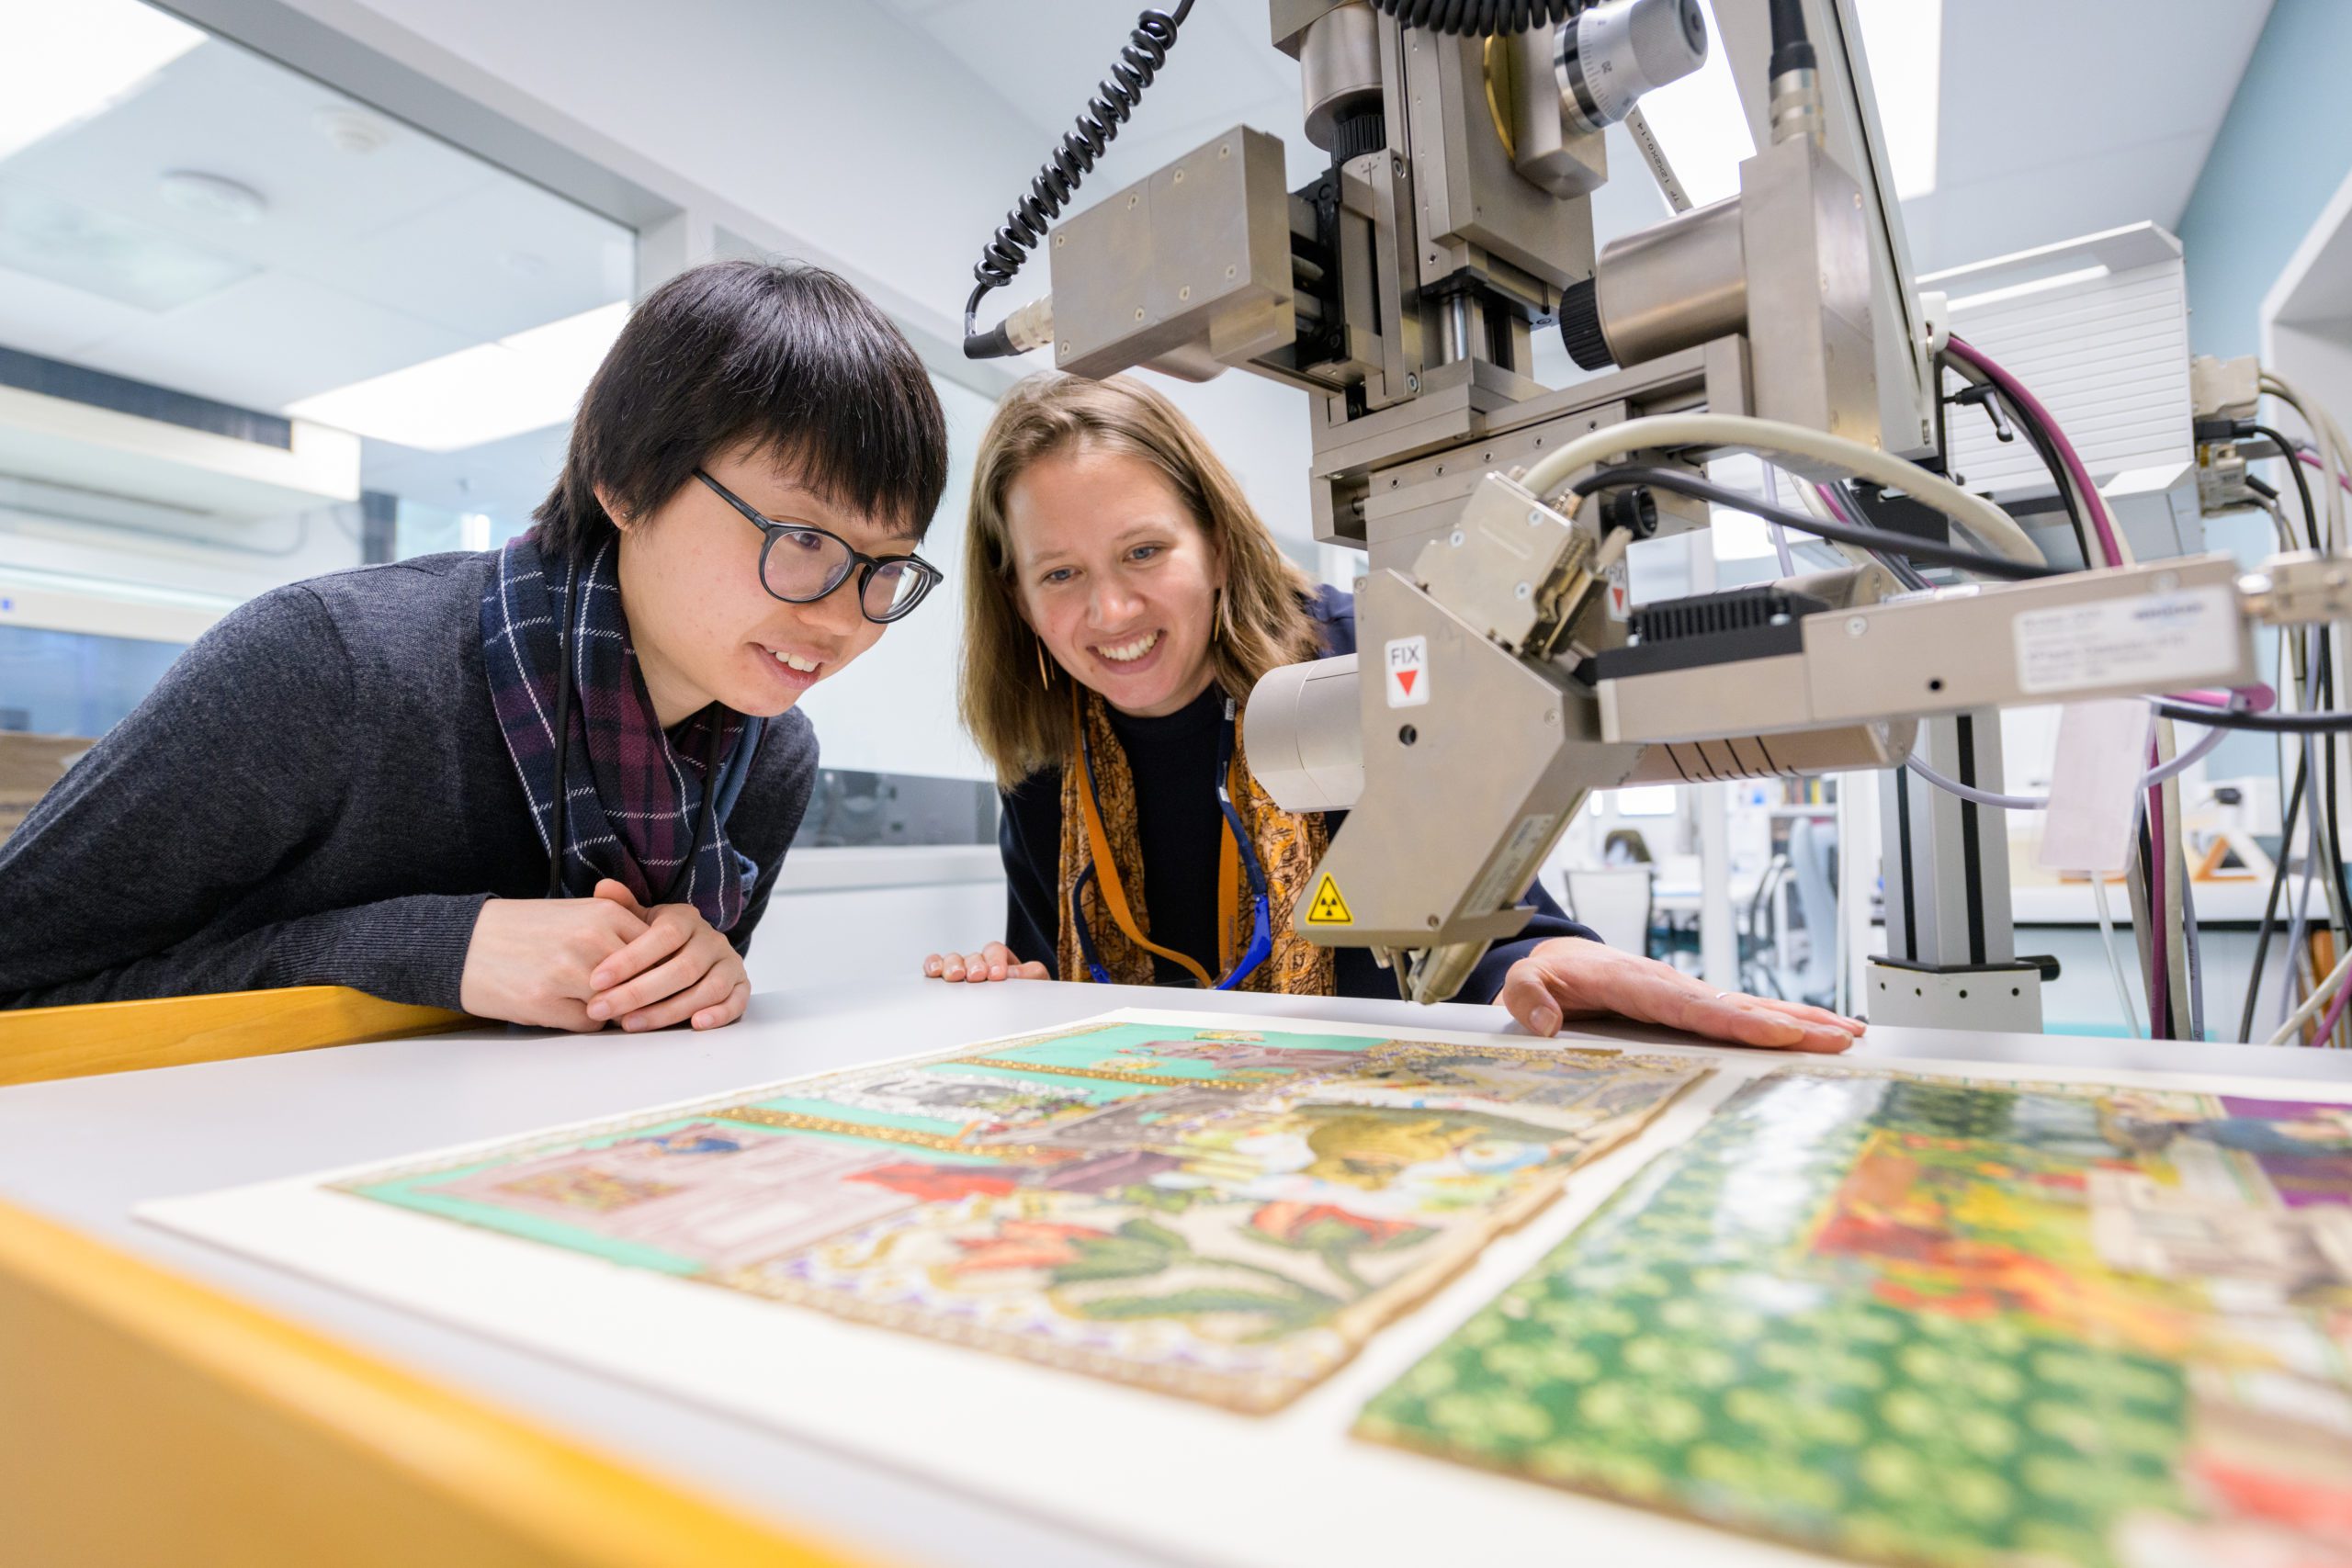 Dr. Rosie Grayburn (right) and graduate student Yan Ling Choi examine the elemental composition of the pigments on “Helen’s Scrapbook House,” using non-destructive X-ray fluorescence  analysis.